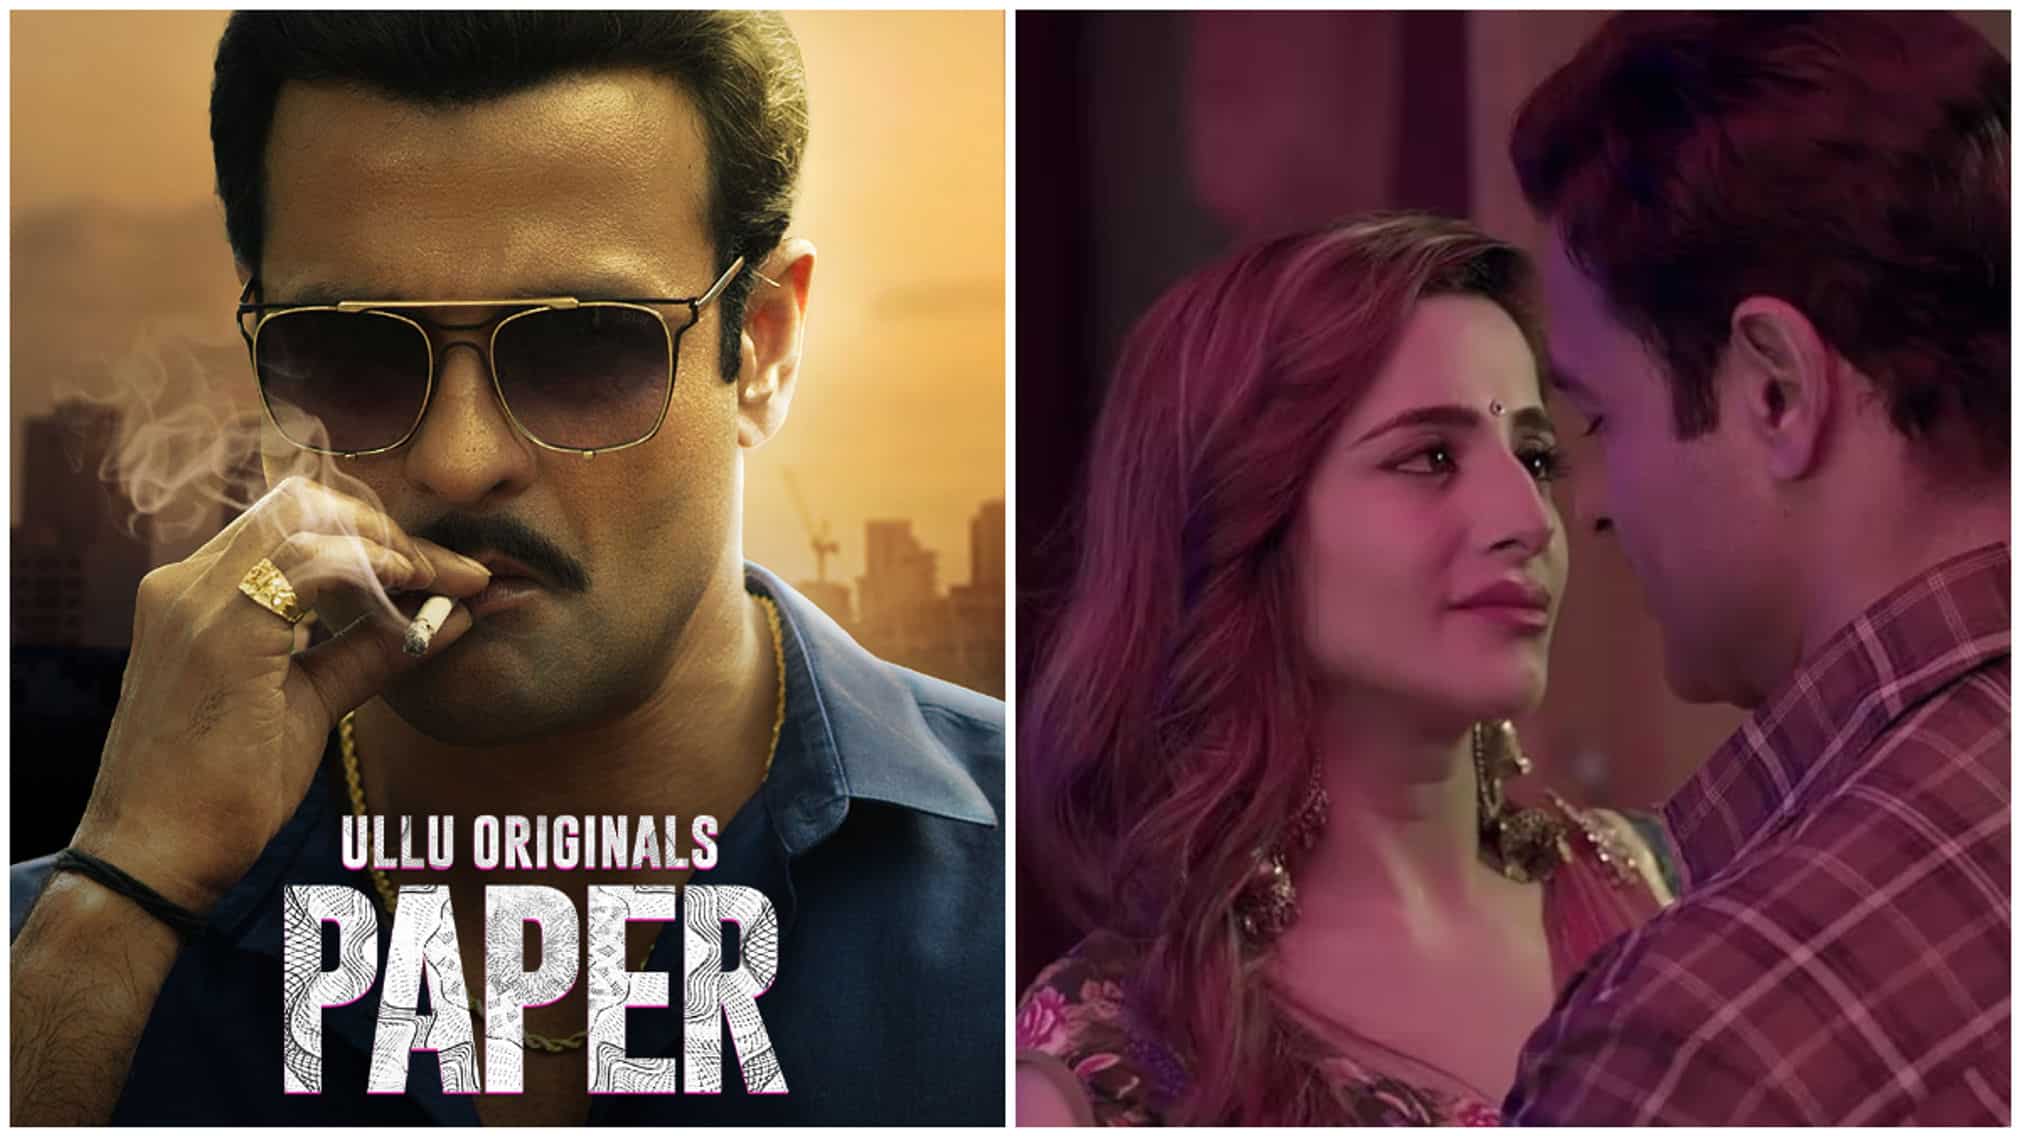 https://www.mobilemasala.com/movies/Paper---Rohit-Roy-Ullu-series-delves-into-the-dark-world-of-crime-i272751